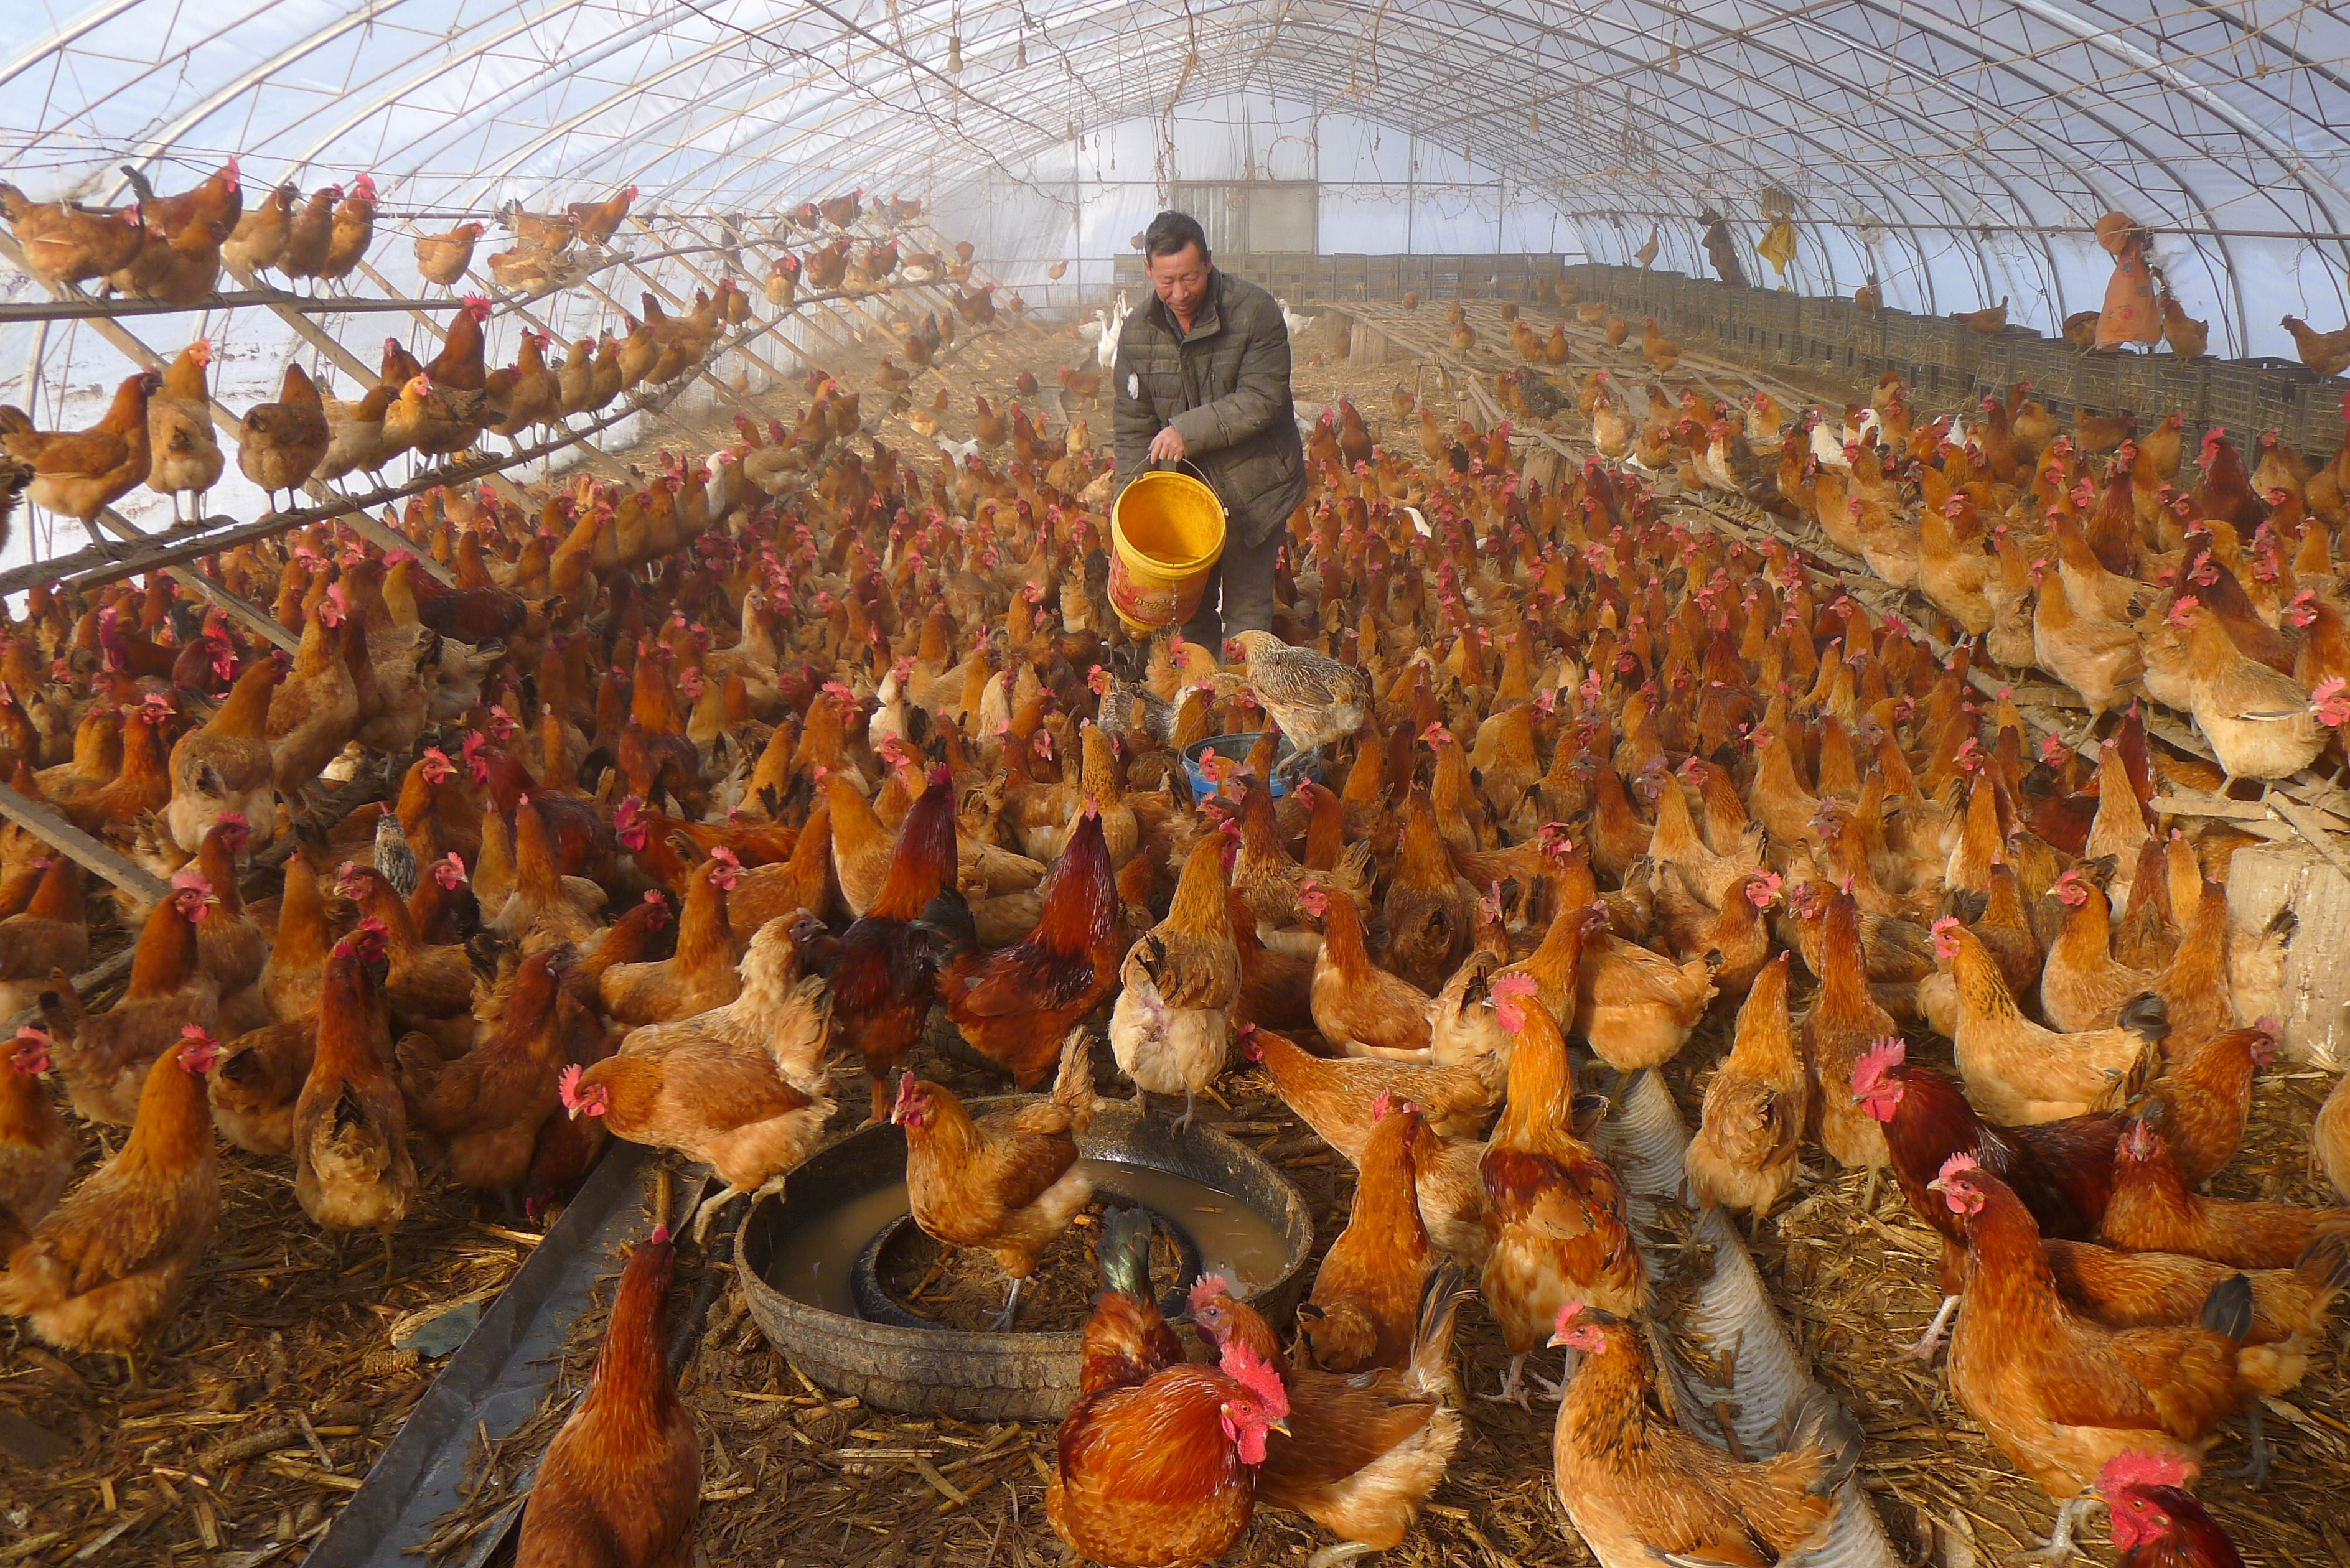 Man provides water for chickens inside a greenhouse at a farm in Heihe